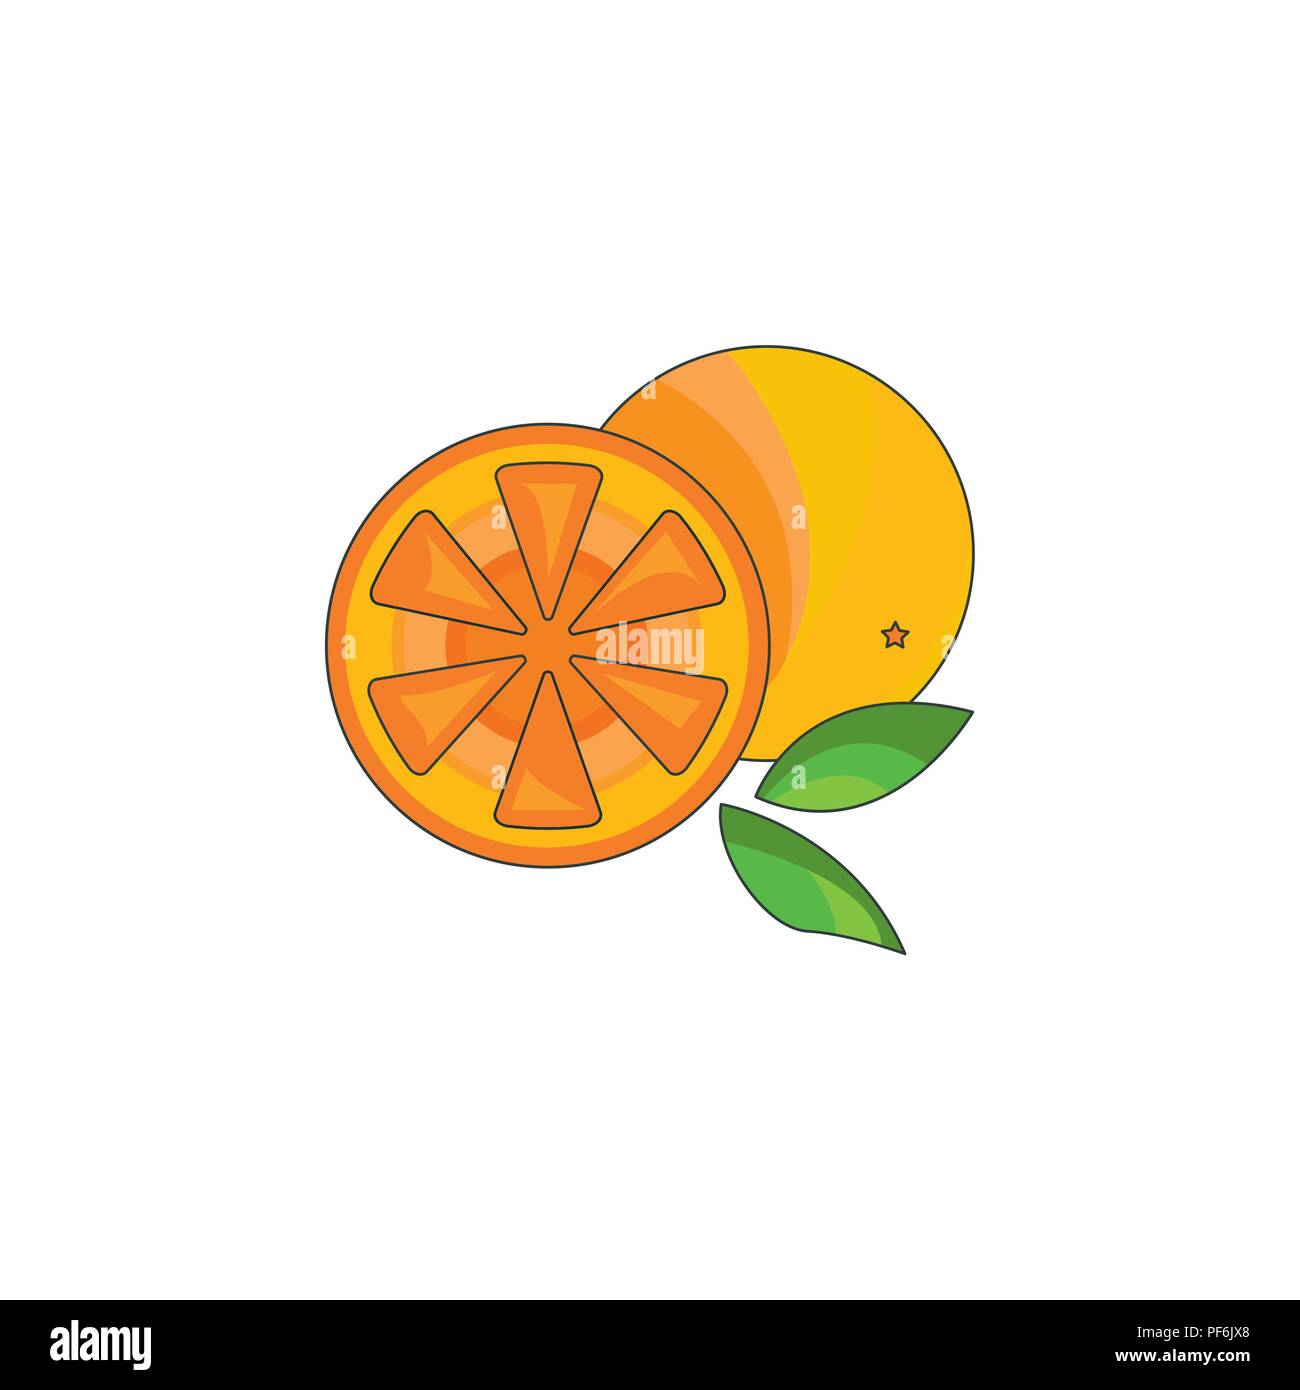 Color vector illustration. Orange icon on a white background Stock Vector